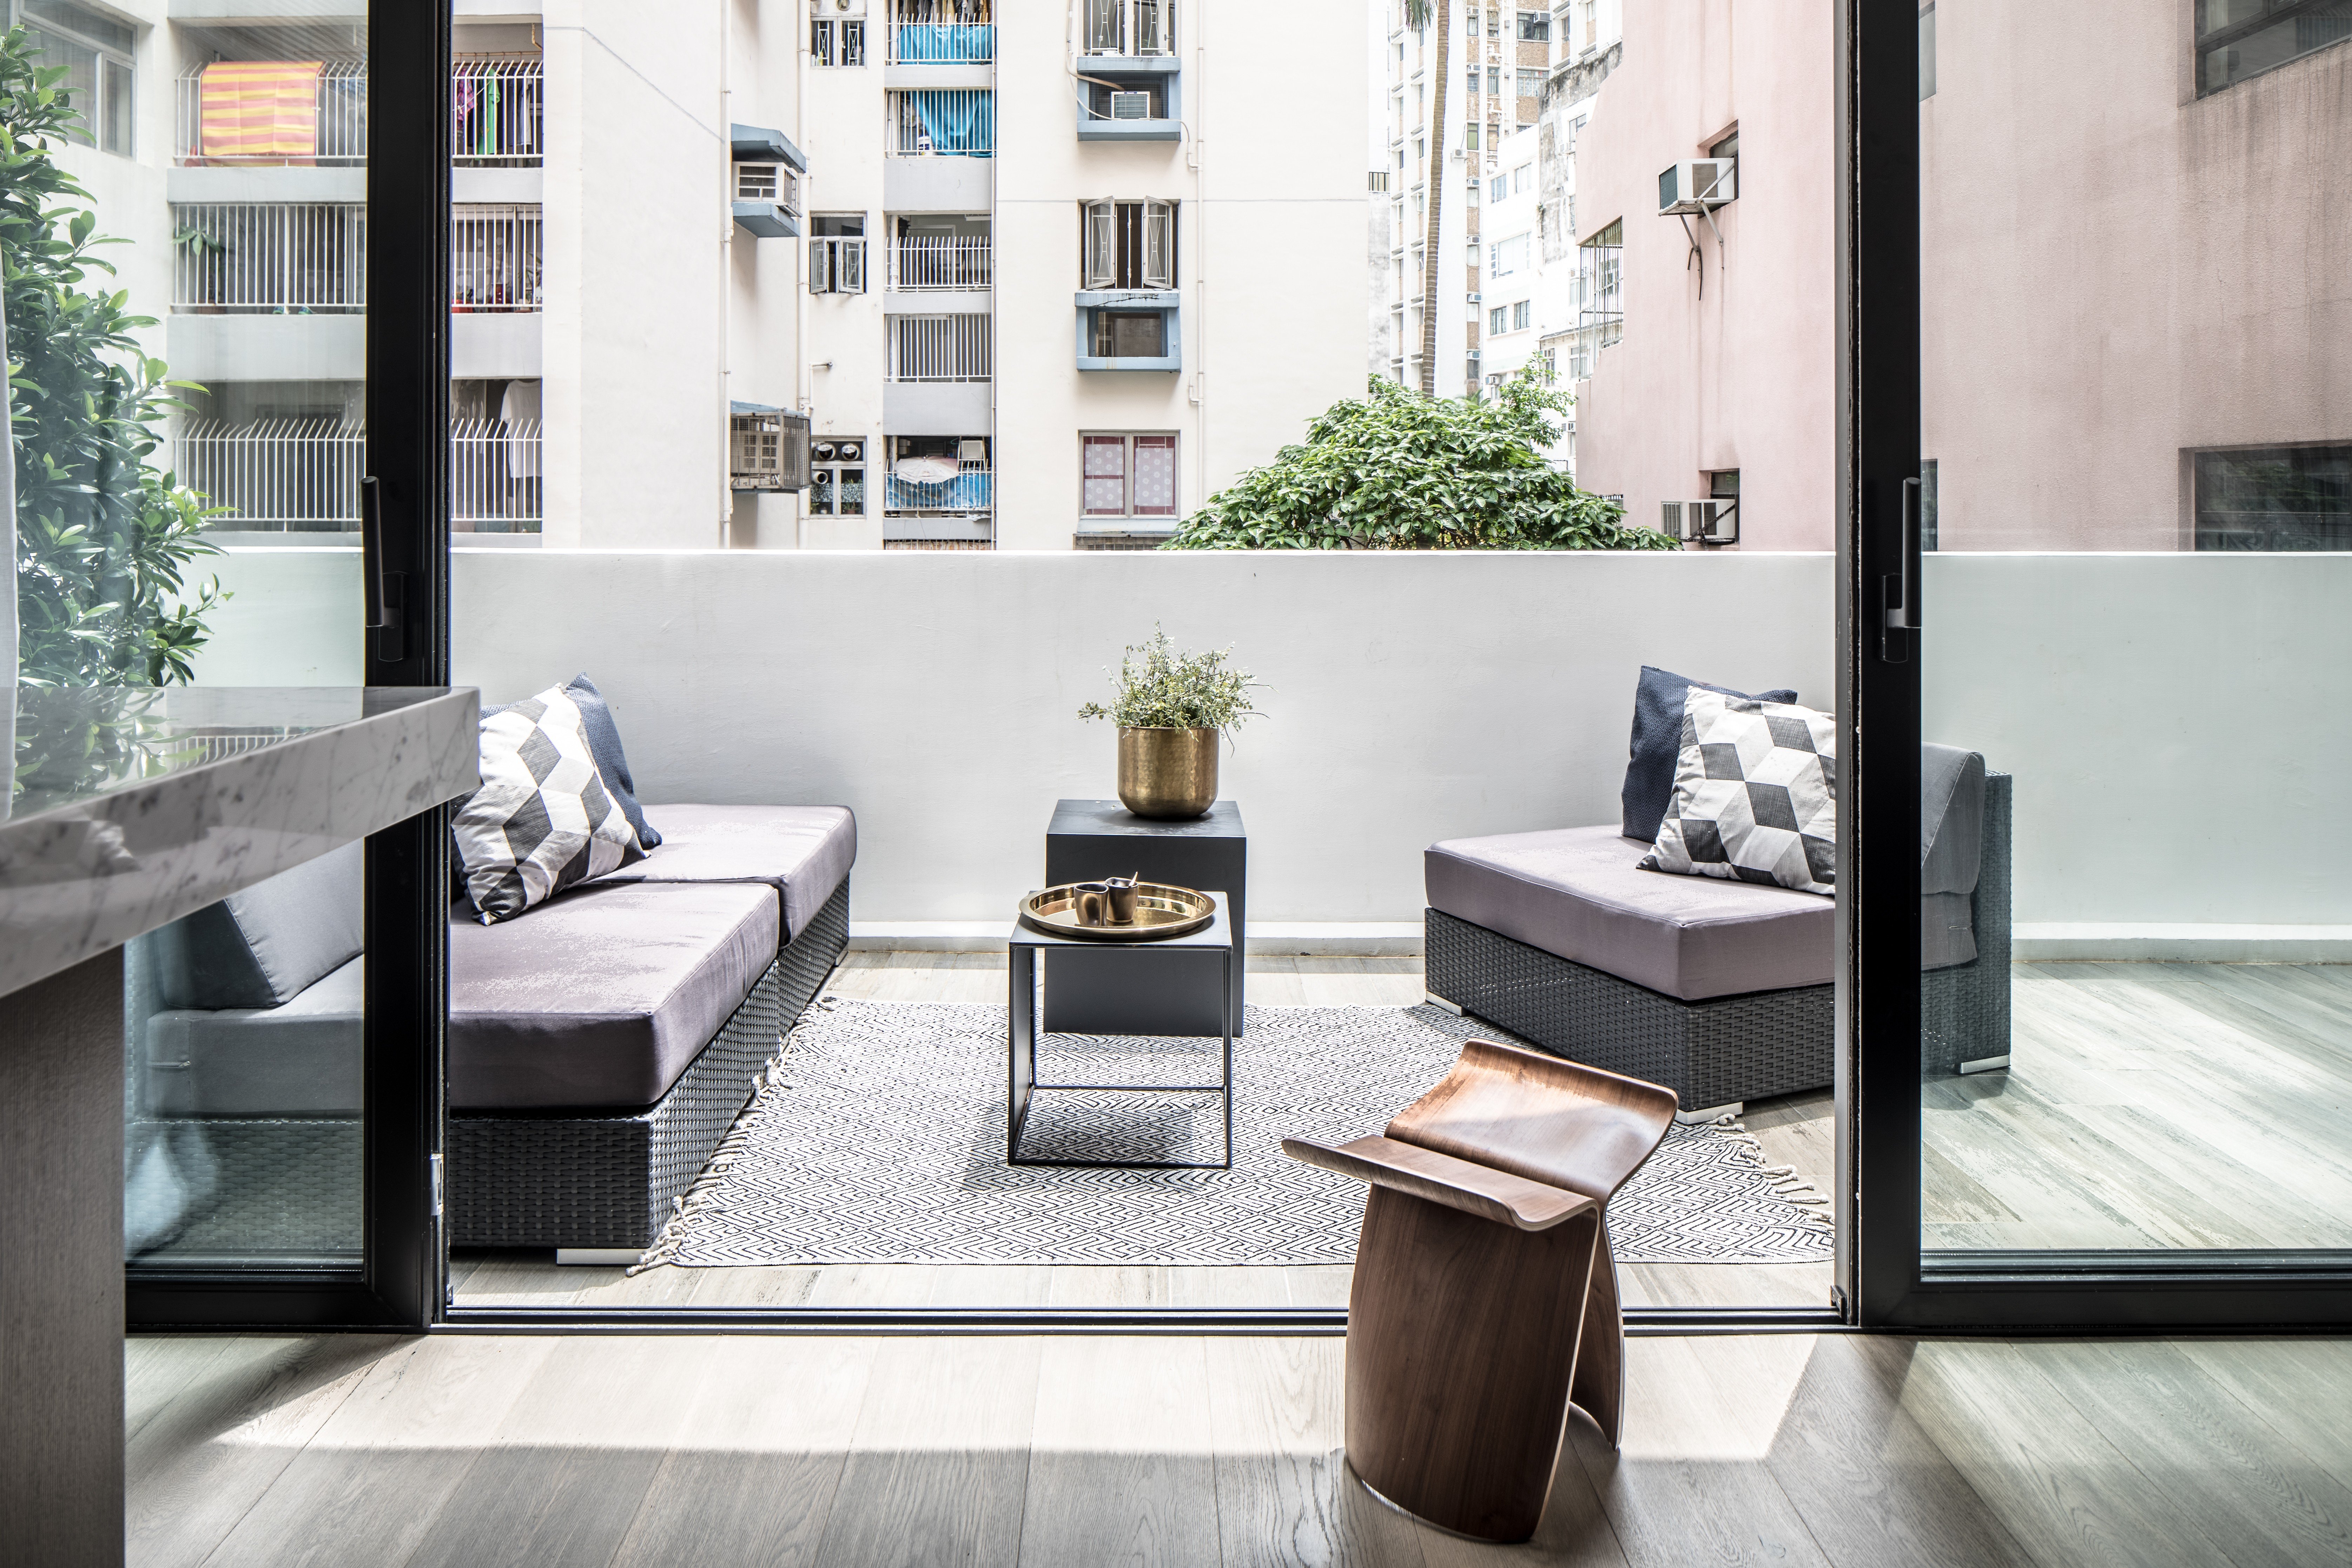 Clever details such as glass doors and internal windows have helped turn a poky flat into a light-filled apartment in which the spacious wraparound terrace becomes a natural extension of the interior